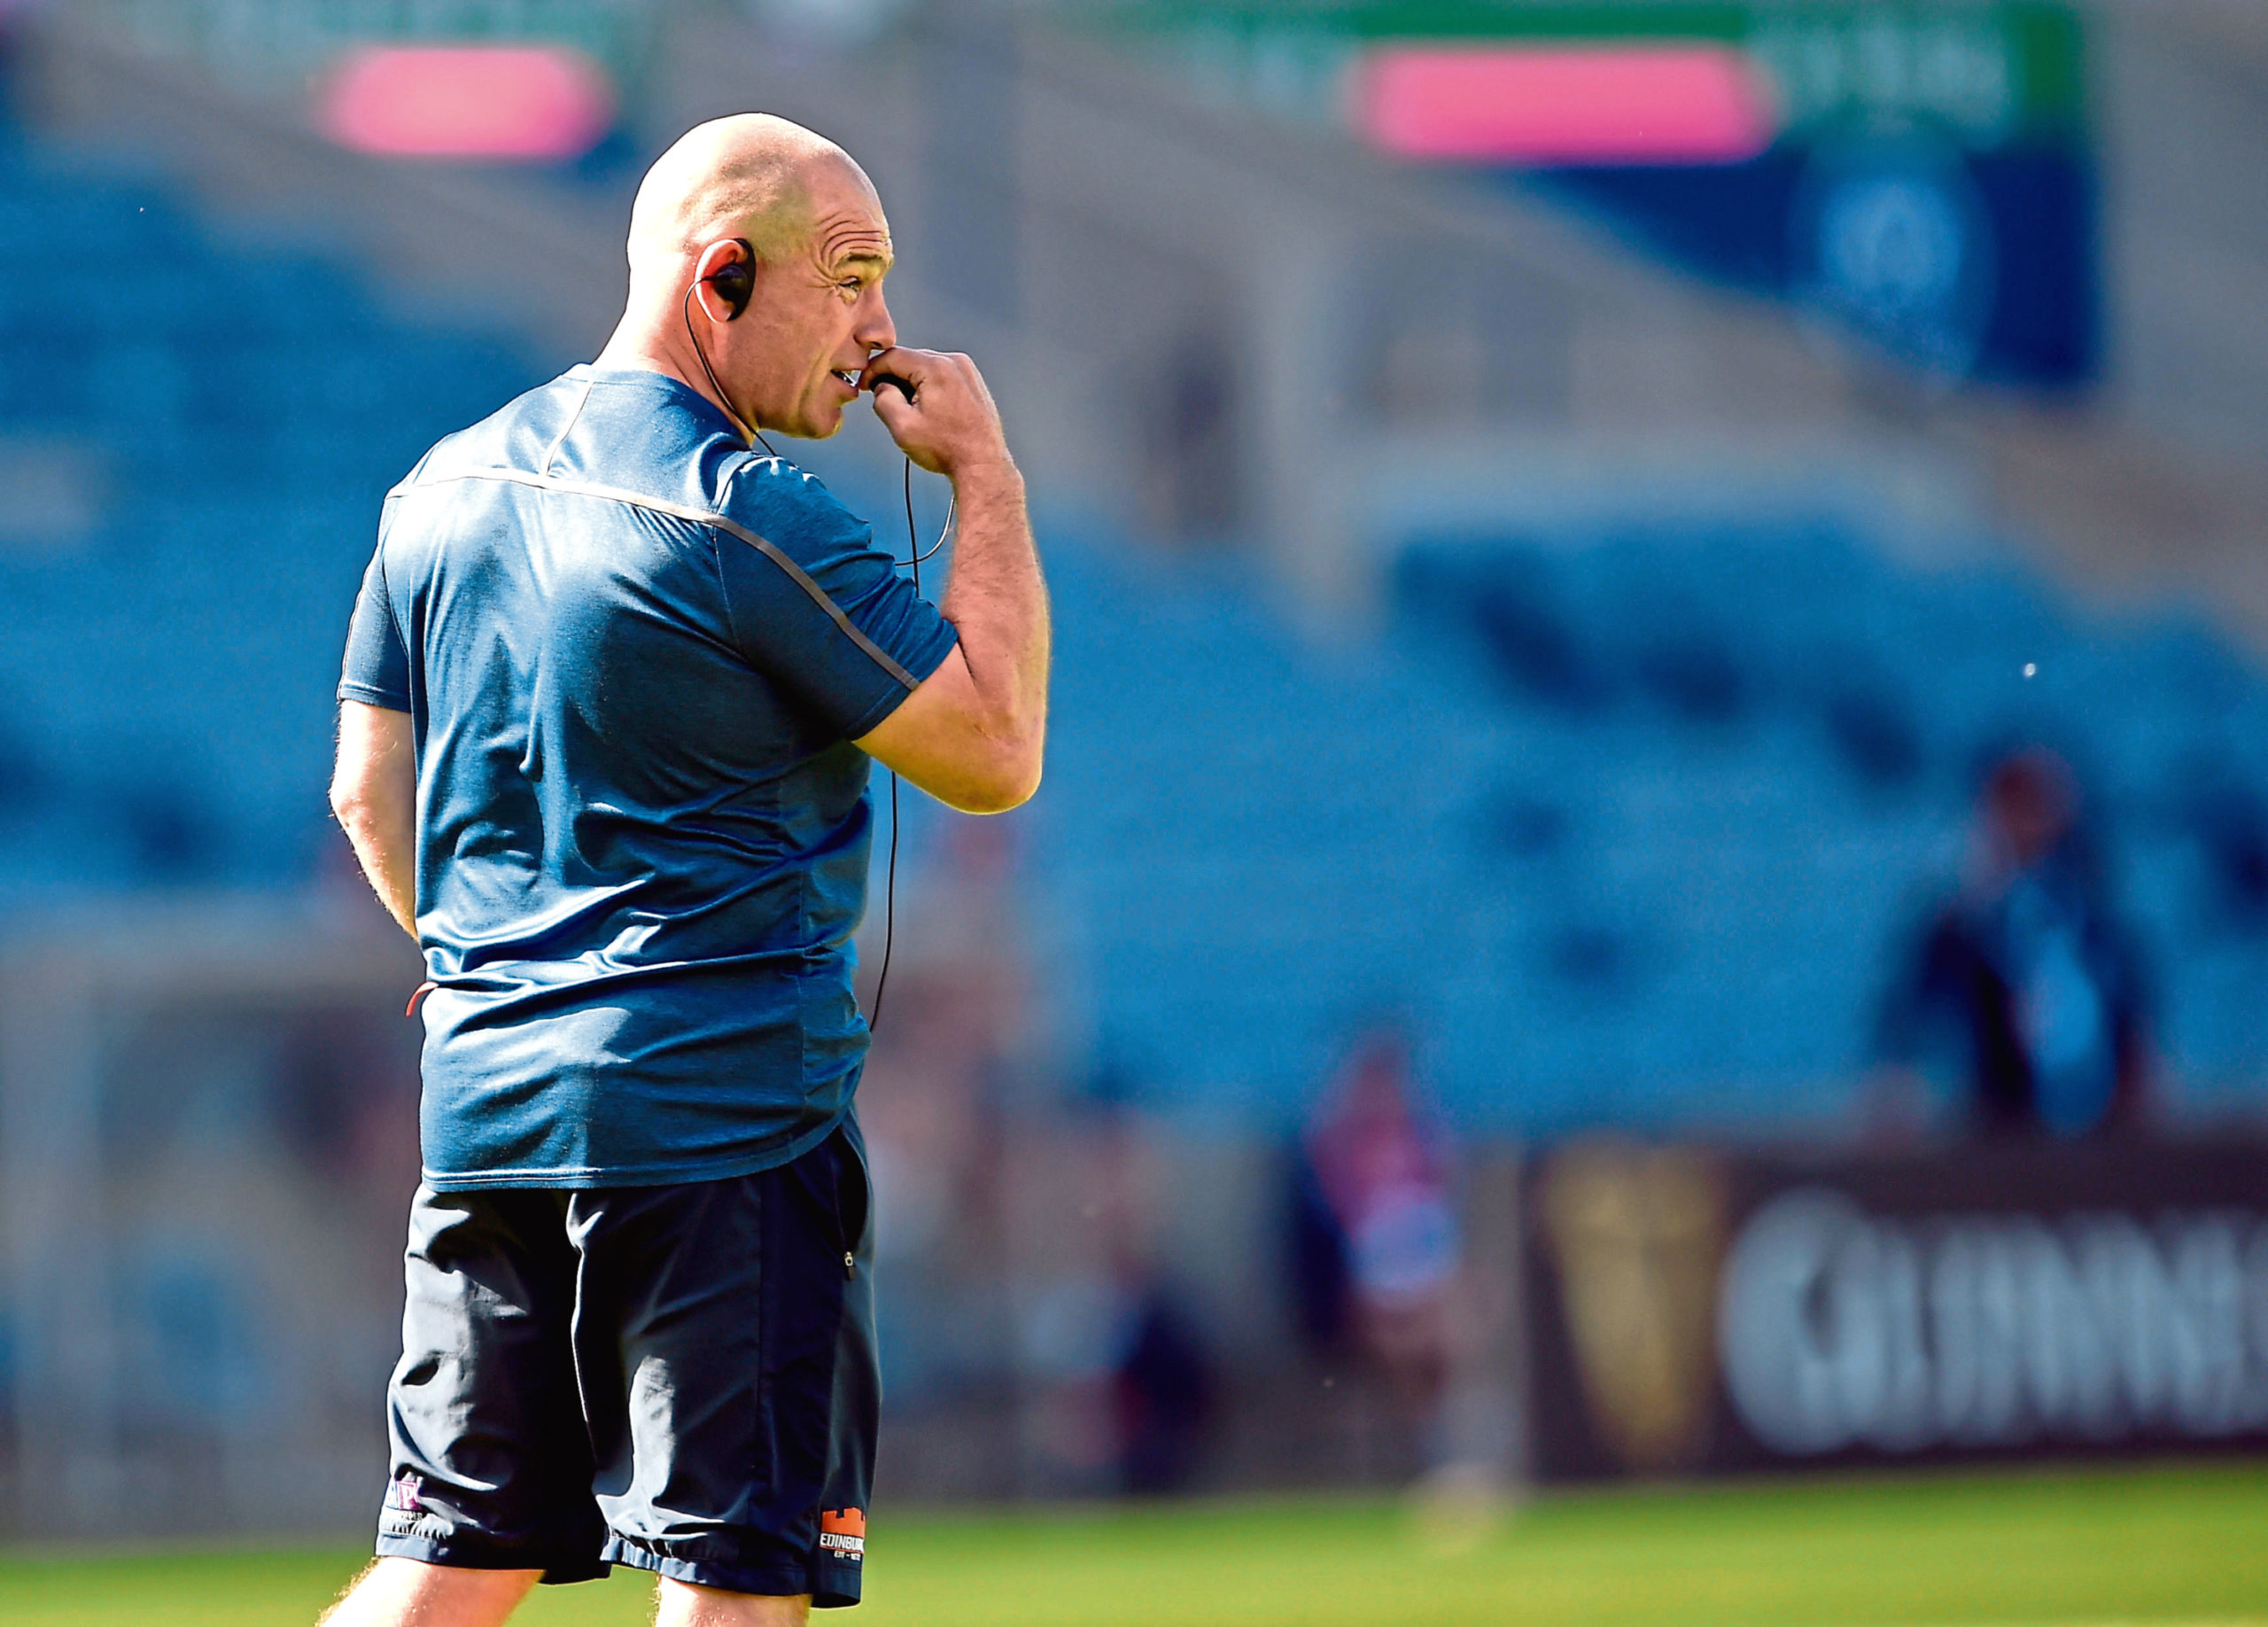 Edinburgh head coach Richard Cockerill before the Guinness PRO14 match at BT Murrayfield, Edinburgh. PA Photo. Picture date: Saturday August 22, 2020. See PA story RUGBYU Glasgow. Photo credit should read: Ian Rutherford/PA Wire. RESTRICTIONS: Editorial use only. No commercial use.